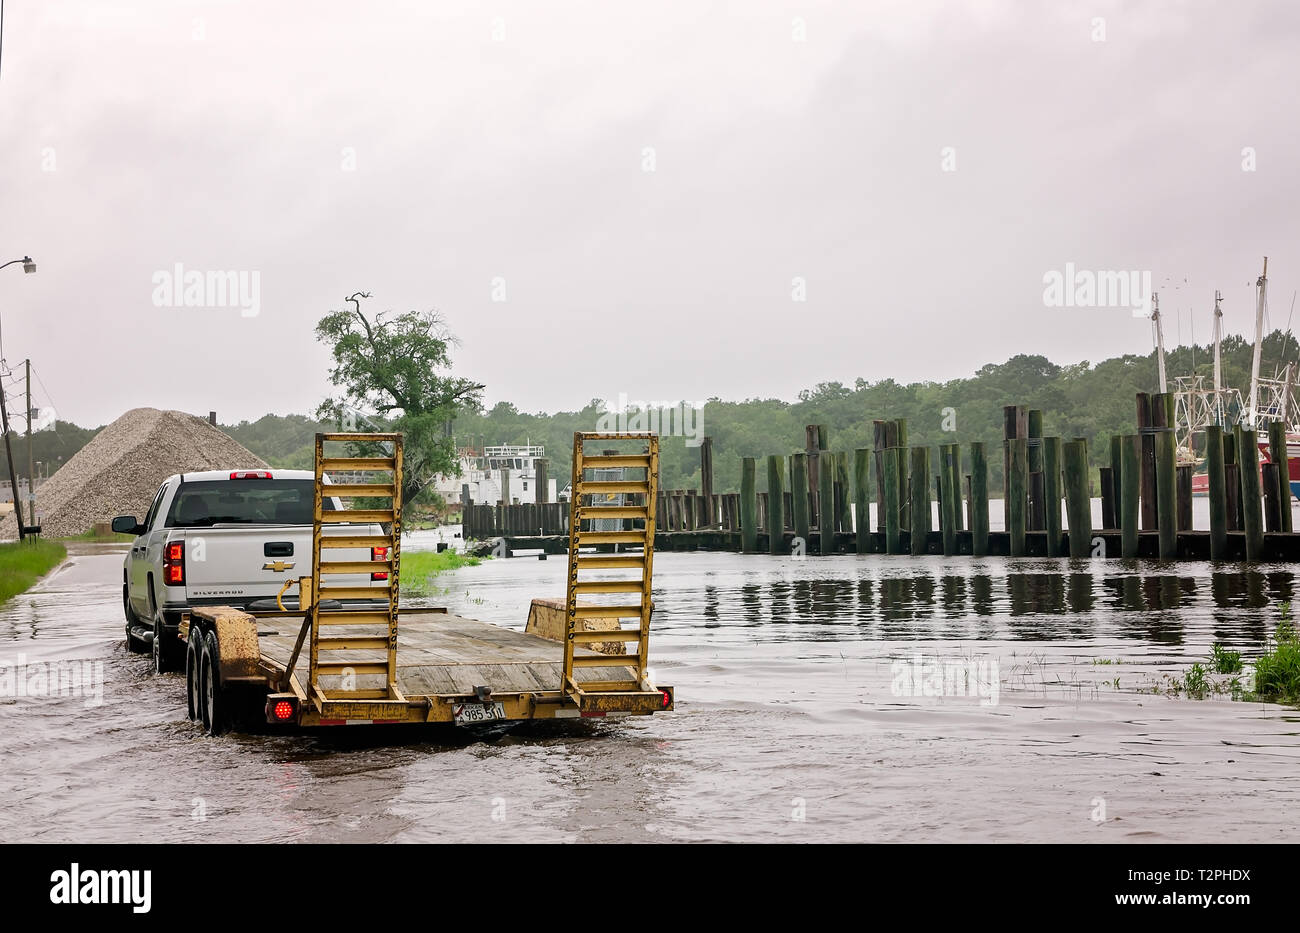 A truck makes its way down a flooded Shell Belt Road after Tropical Storm Cindy, June 22, 2017, in Bayou La Batre, Alabama. Stock Photo